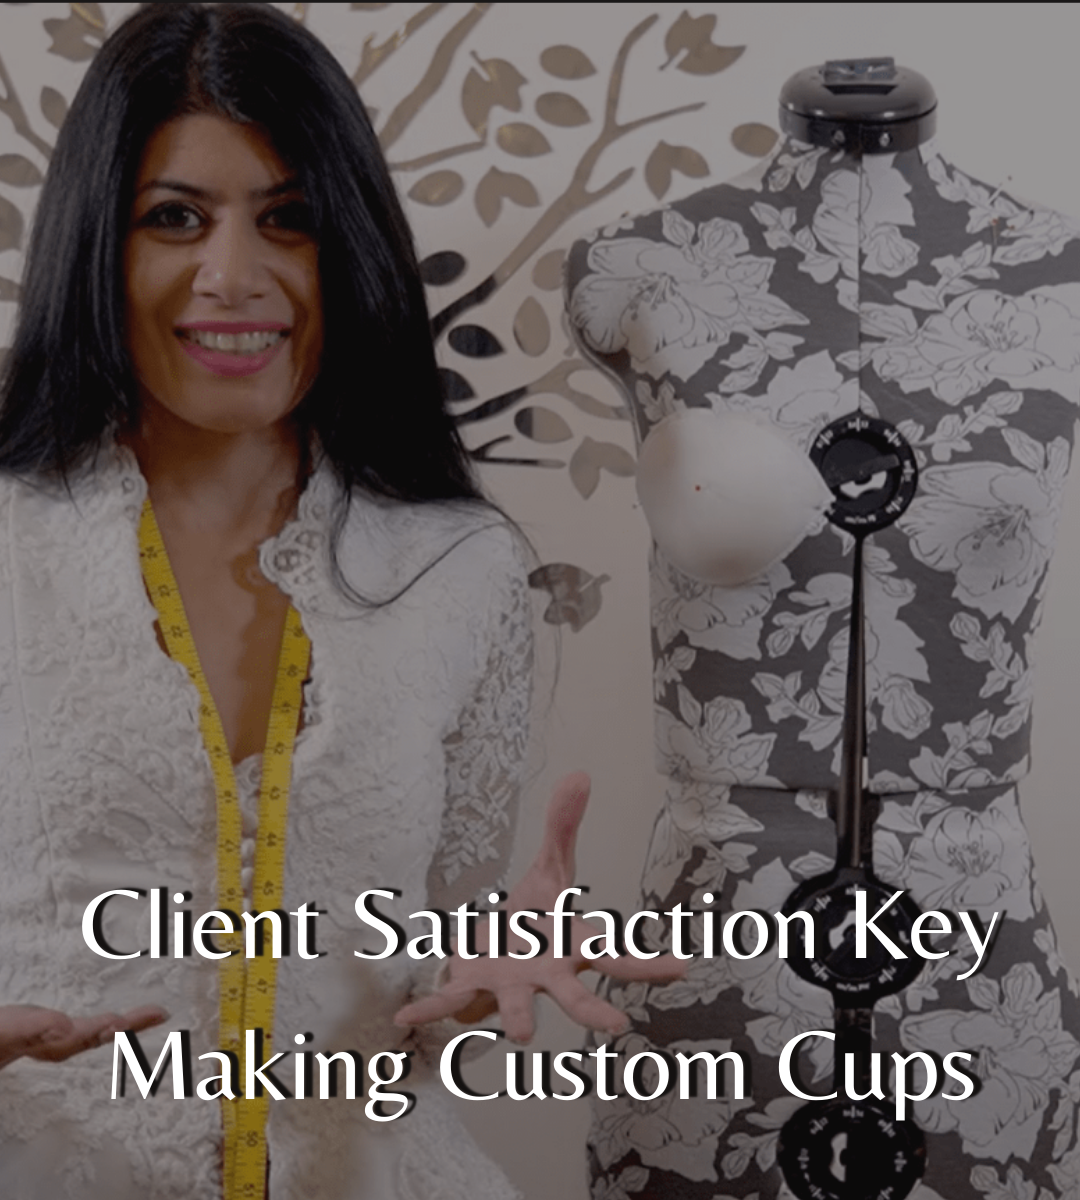 'Client Satisfaction Key Making Custom Cups' Masterclass